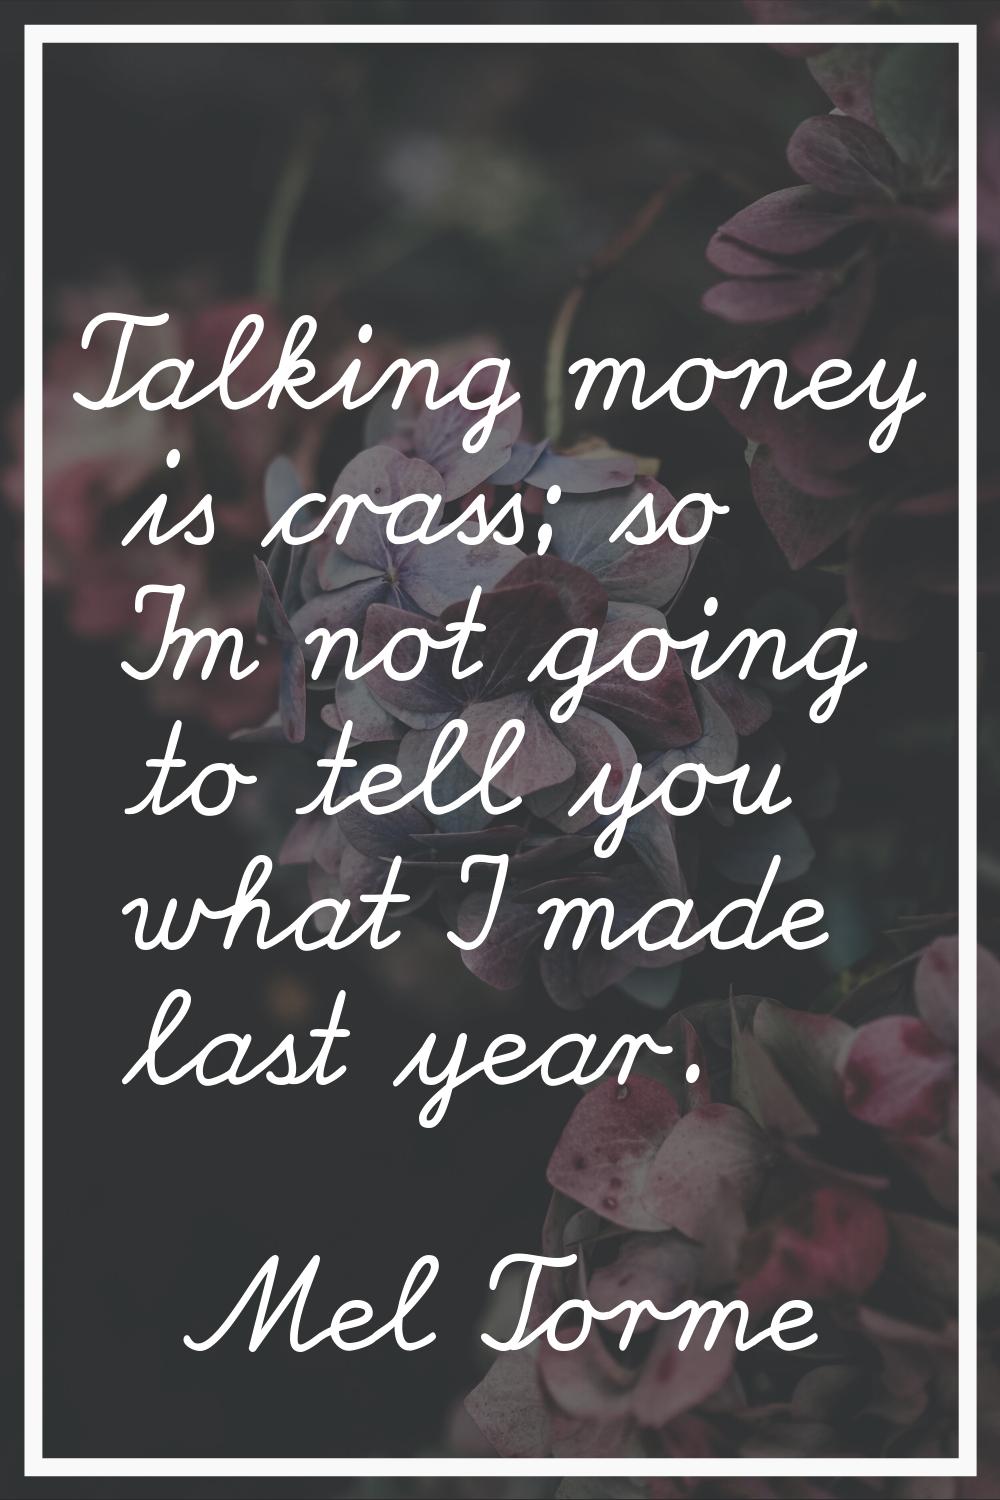 Talking money is crass; so I'm not going to tell you what I made last year.